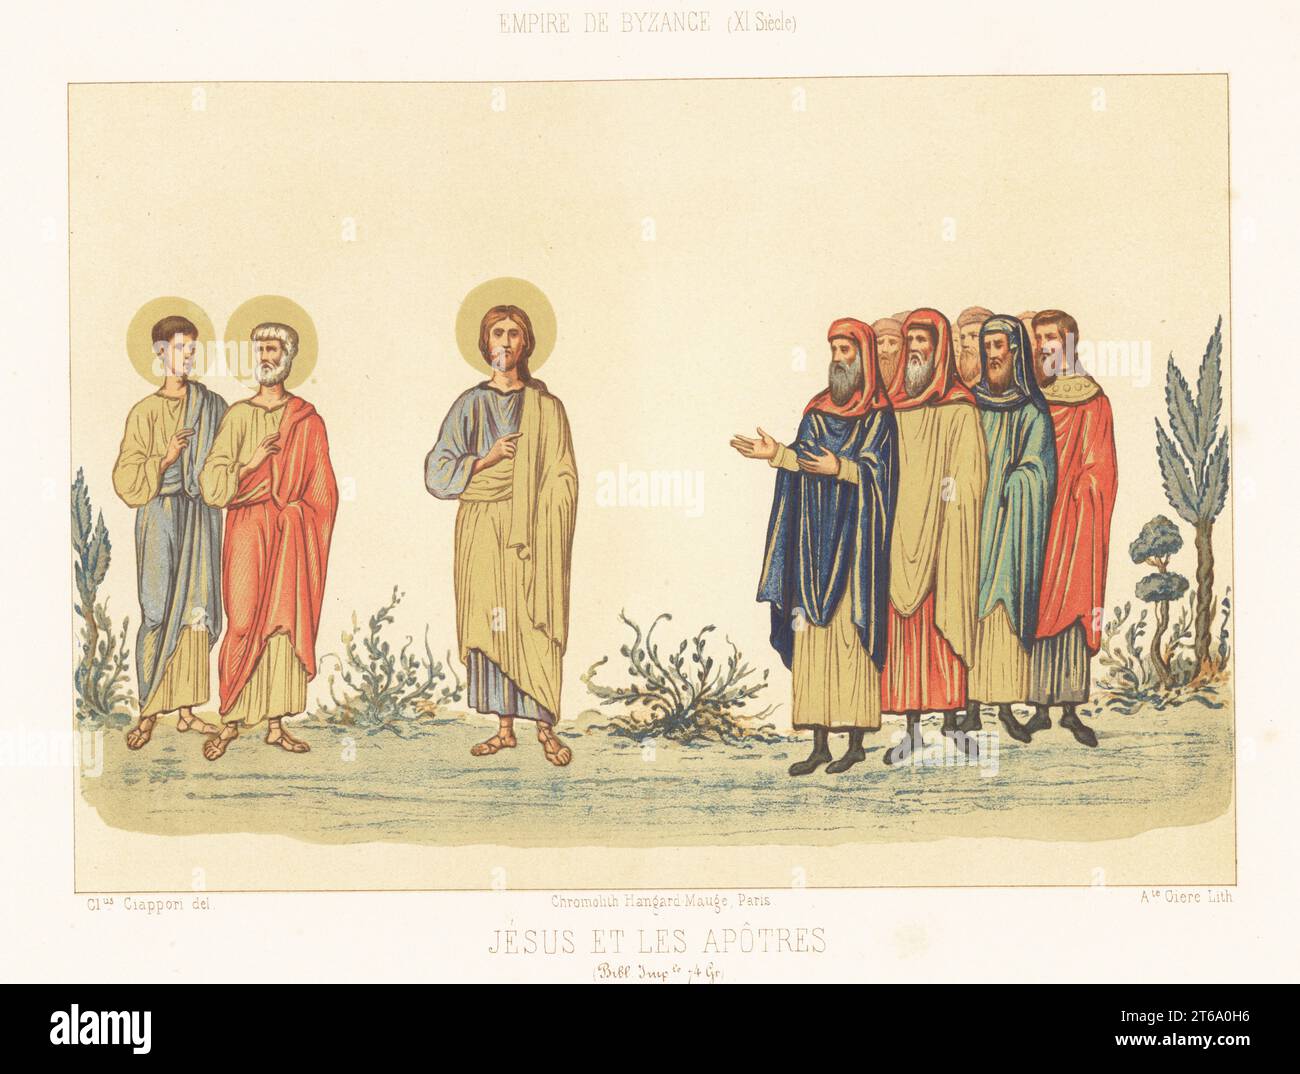 Jesus Christ and the apostles in Byzantine costume, 11th century. All with their right hand in their robes, a Byzantine pose. From a manuscript Gospels, MS 74 G, Bibliotheque Imperiale. Jesus et les apotres, Empire de Byzance, XIe siecle. Chromolithograph by Giare after an illustration by Claudius Joseph Ciappori from Charles Louandres Les Arts Somptuaires, The Sumptuary Arts, Hangard-Mauge, Paris, 1858. Stock Photo